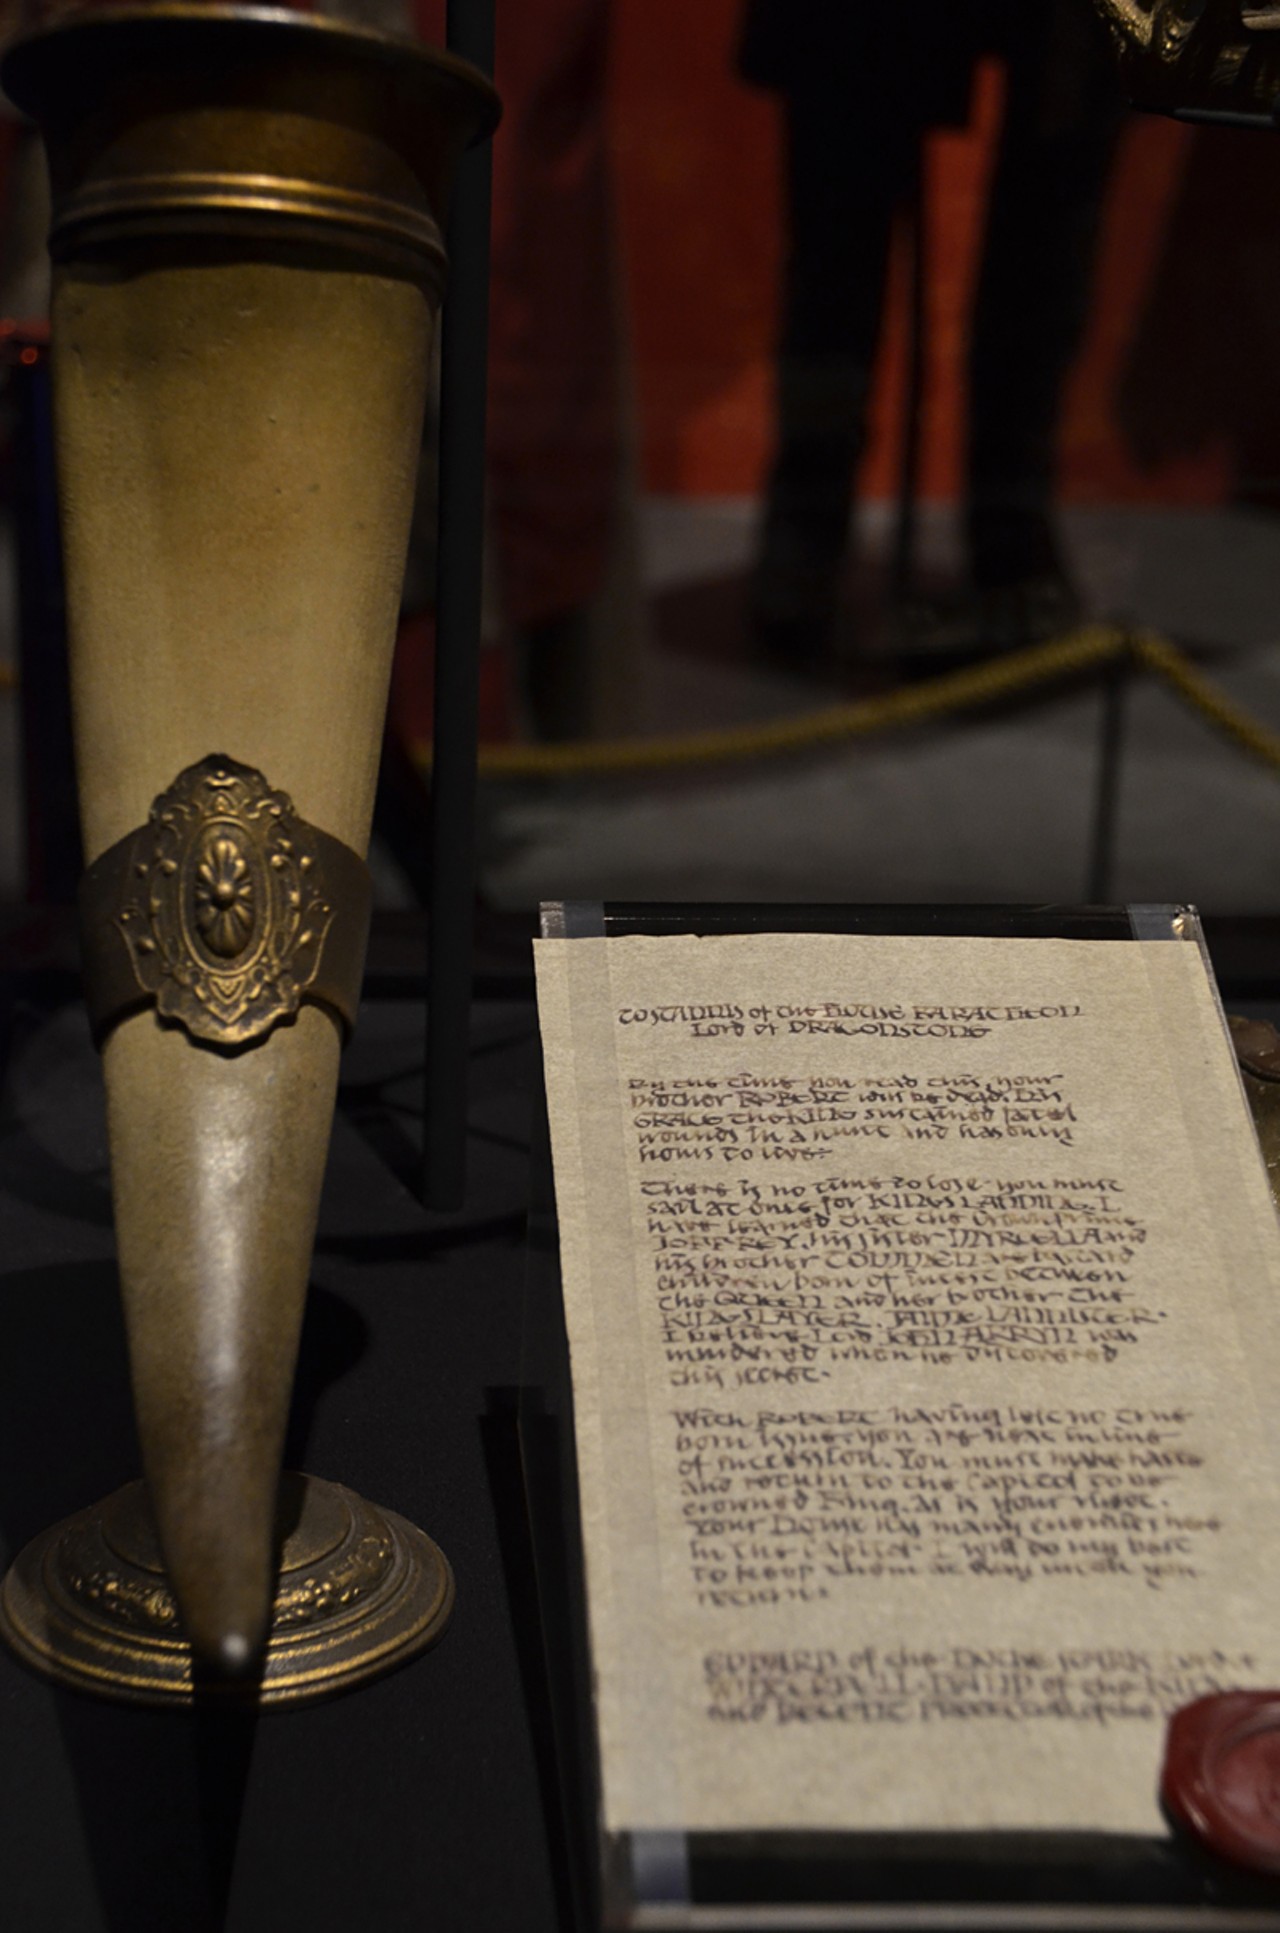 More props from the series include a letter written by Ned Stark in season one.